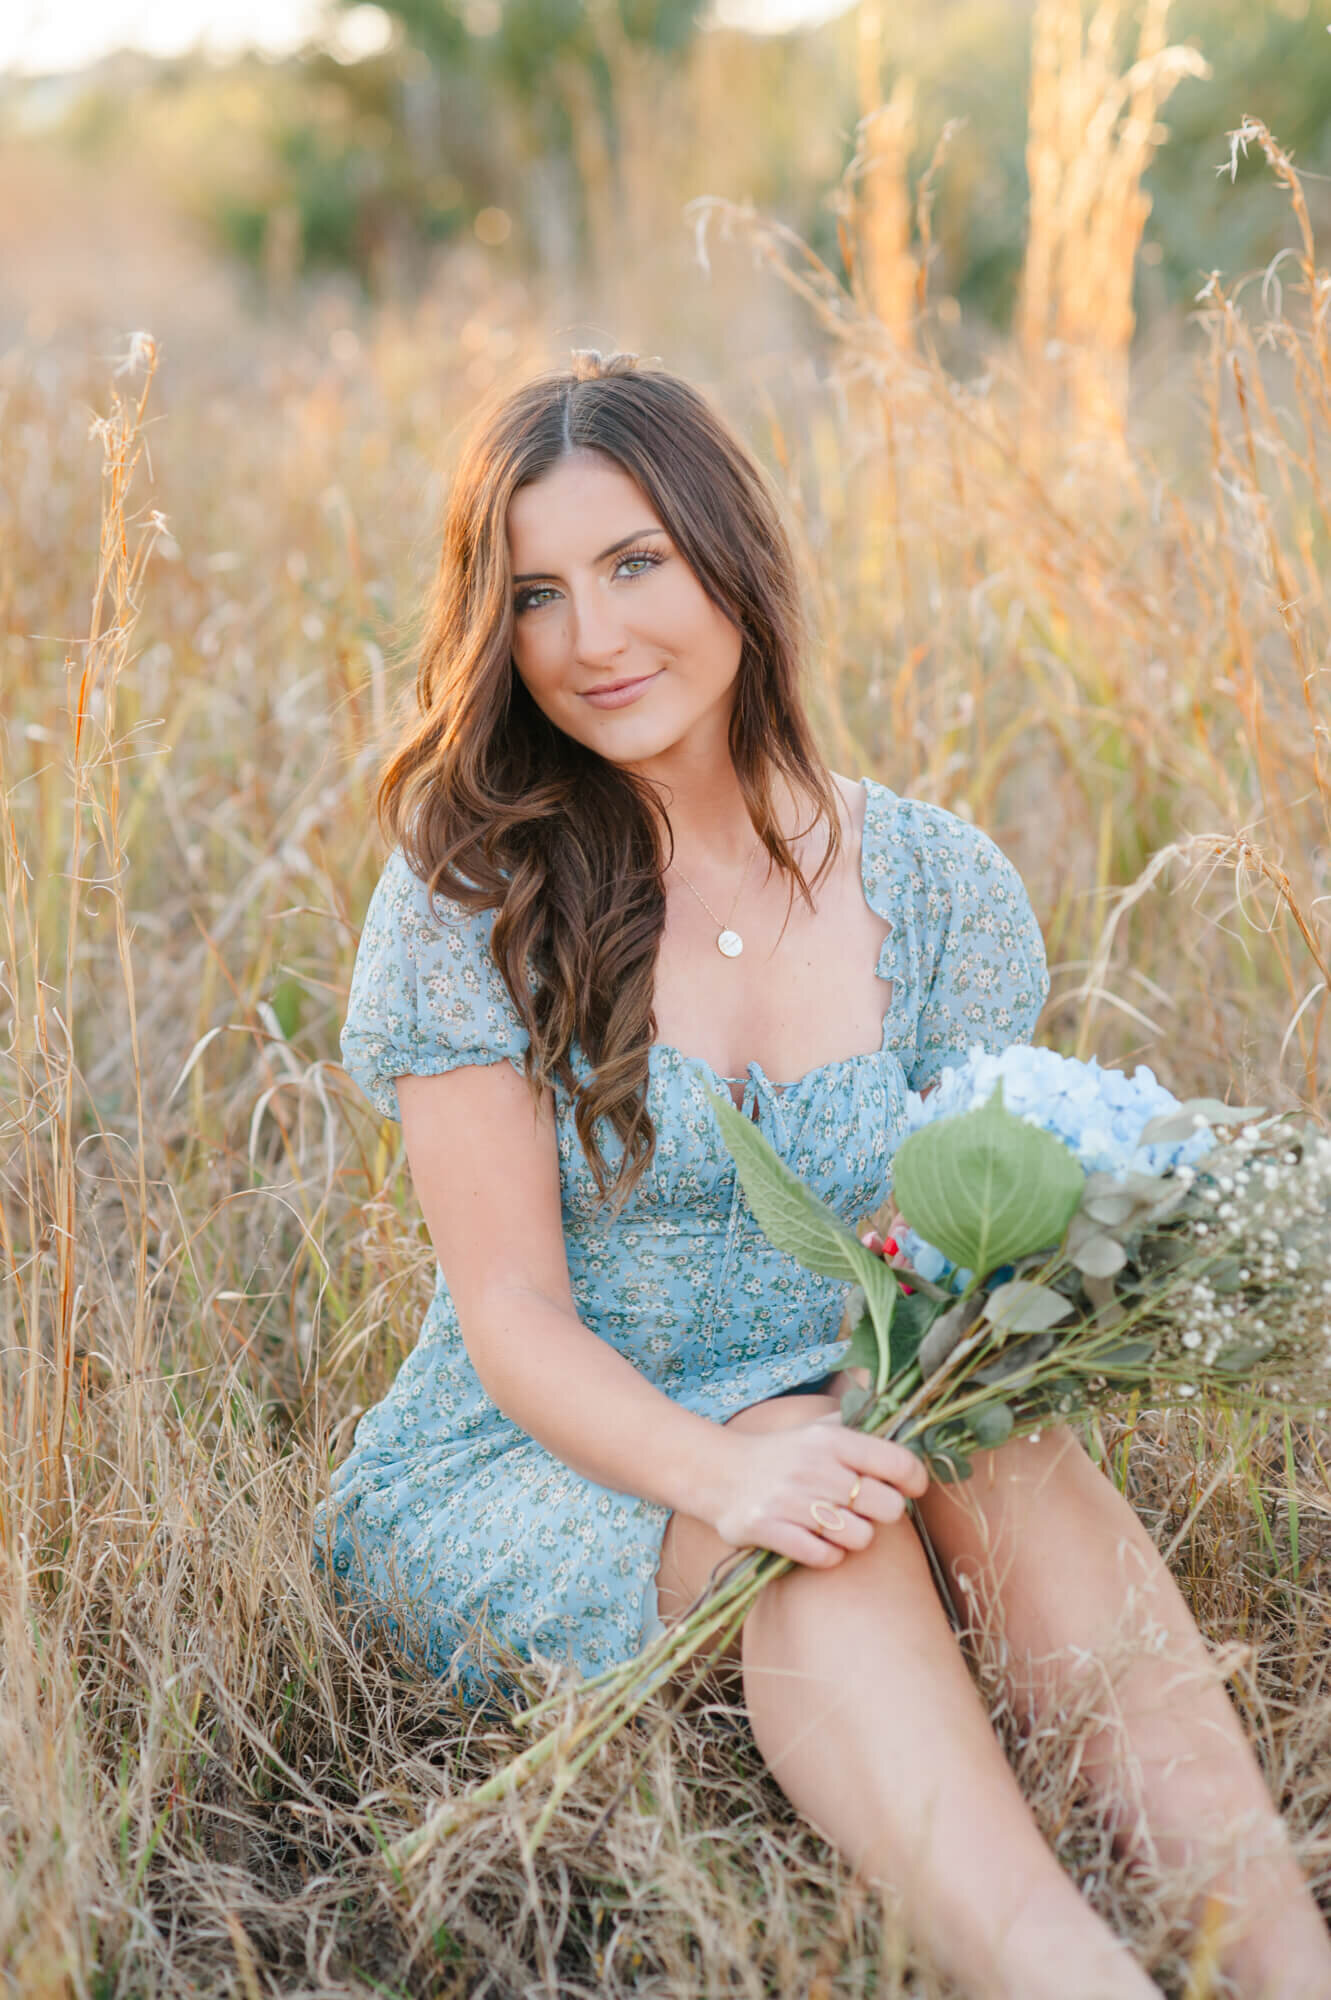 Senior girl wearing beautiful blue floral dress holding florals in a tall grass field